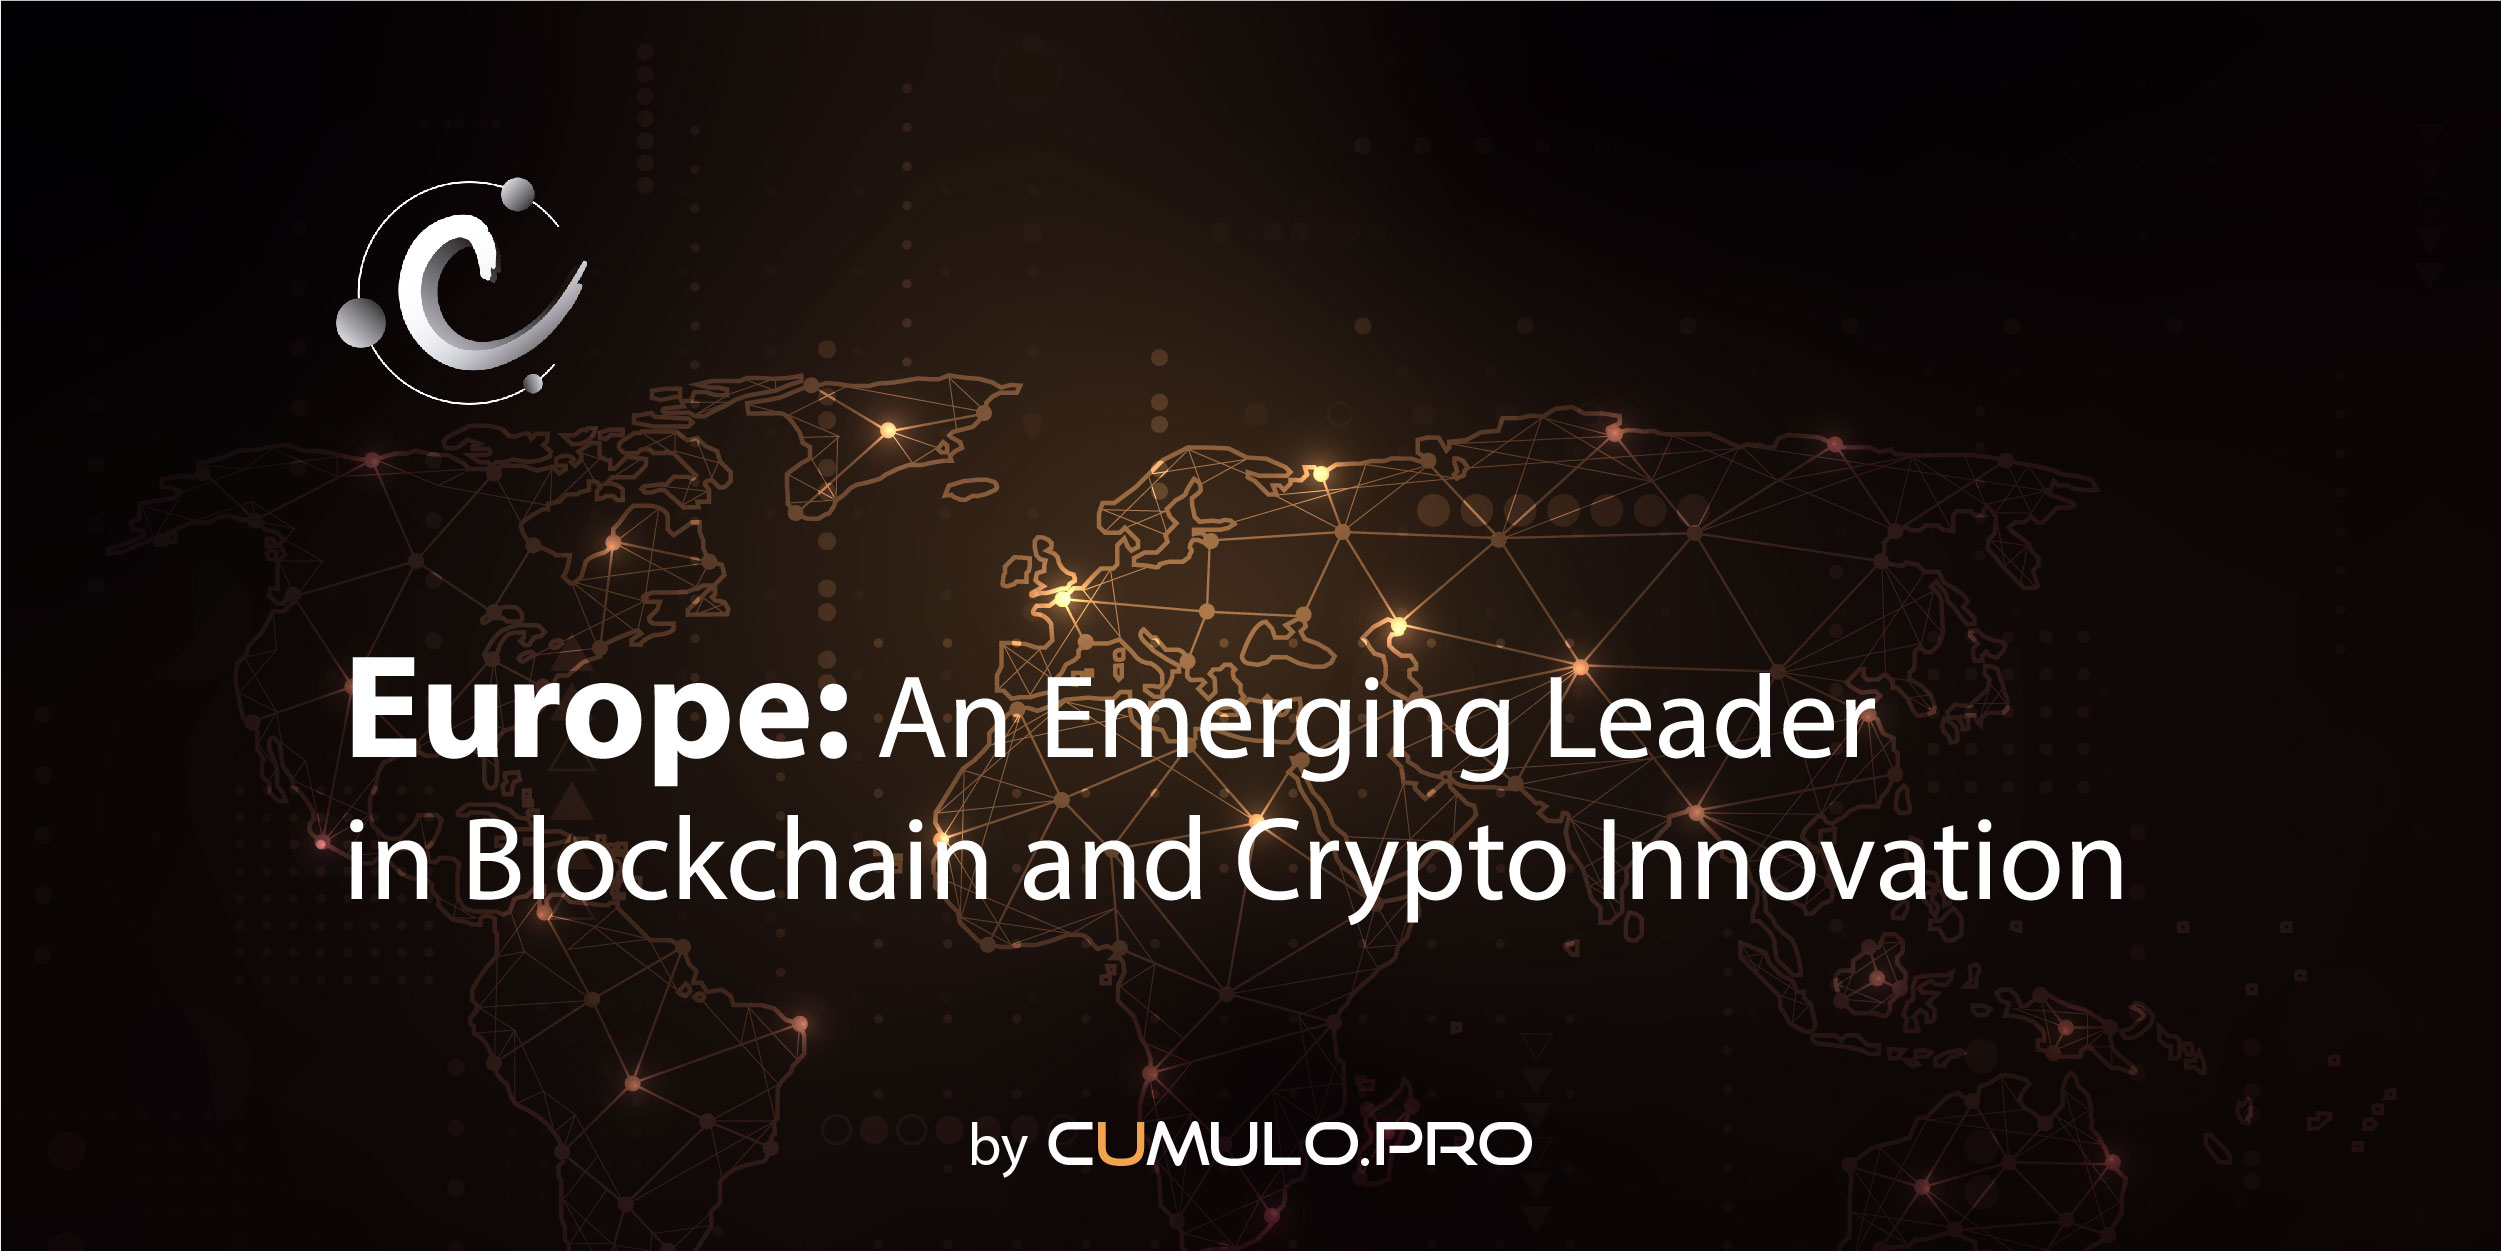 Europe: An Emerging Leader in Blockchain and Crypto Innovation
Cumulo
Cumulo.pro
Cumulo